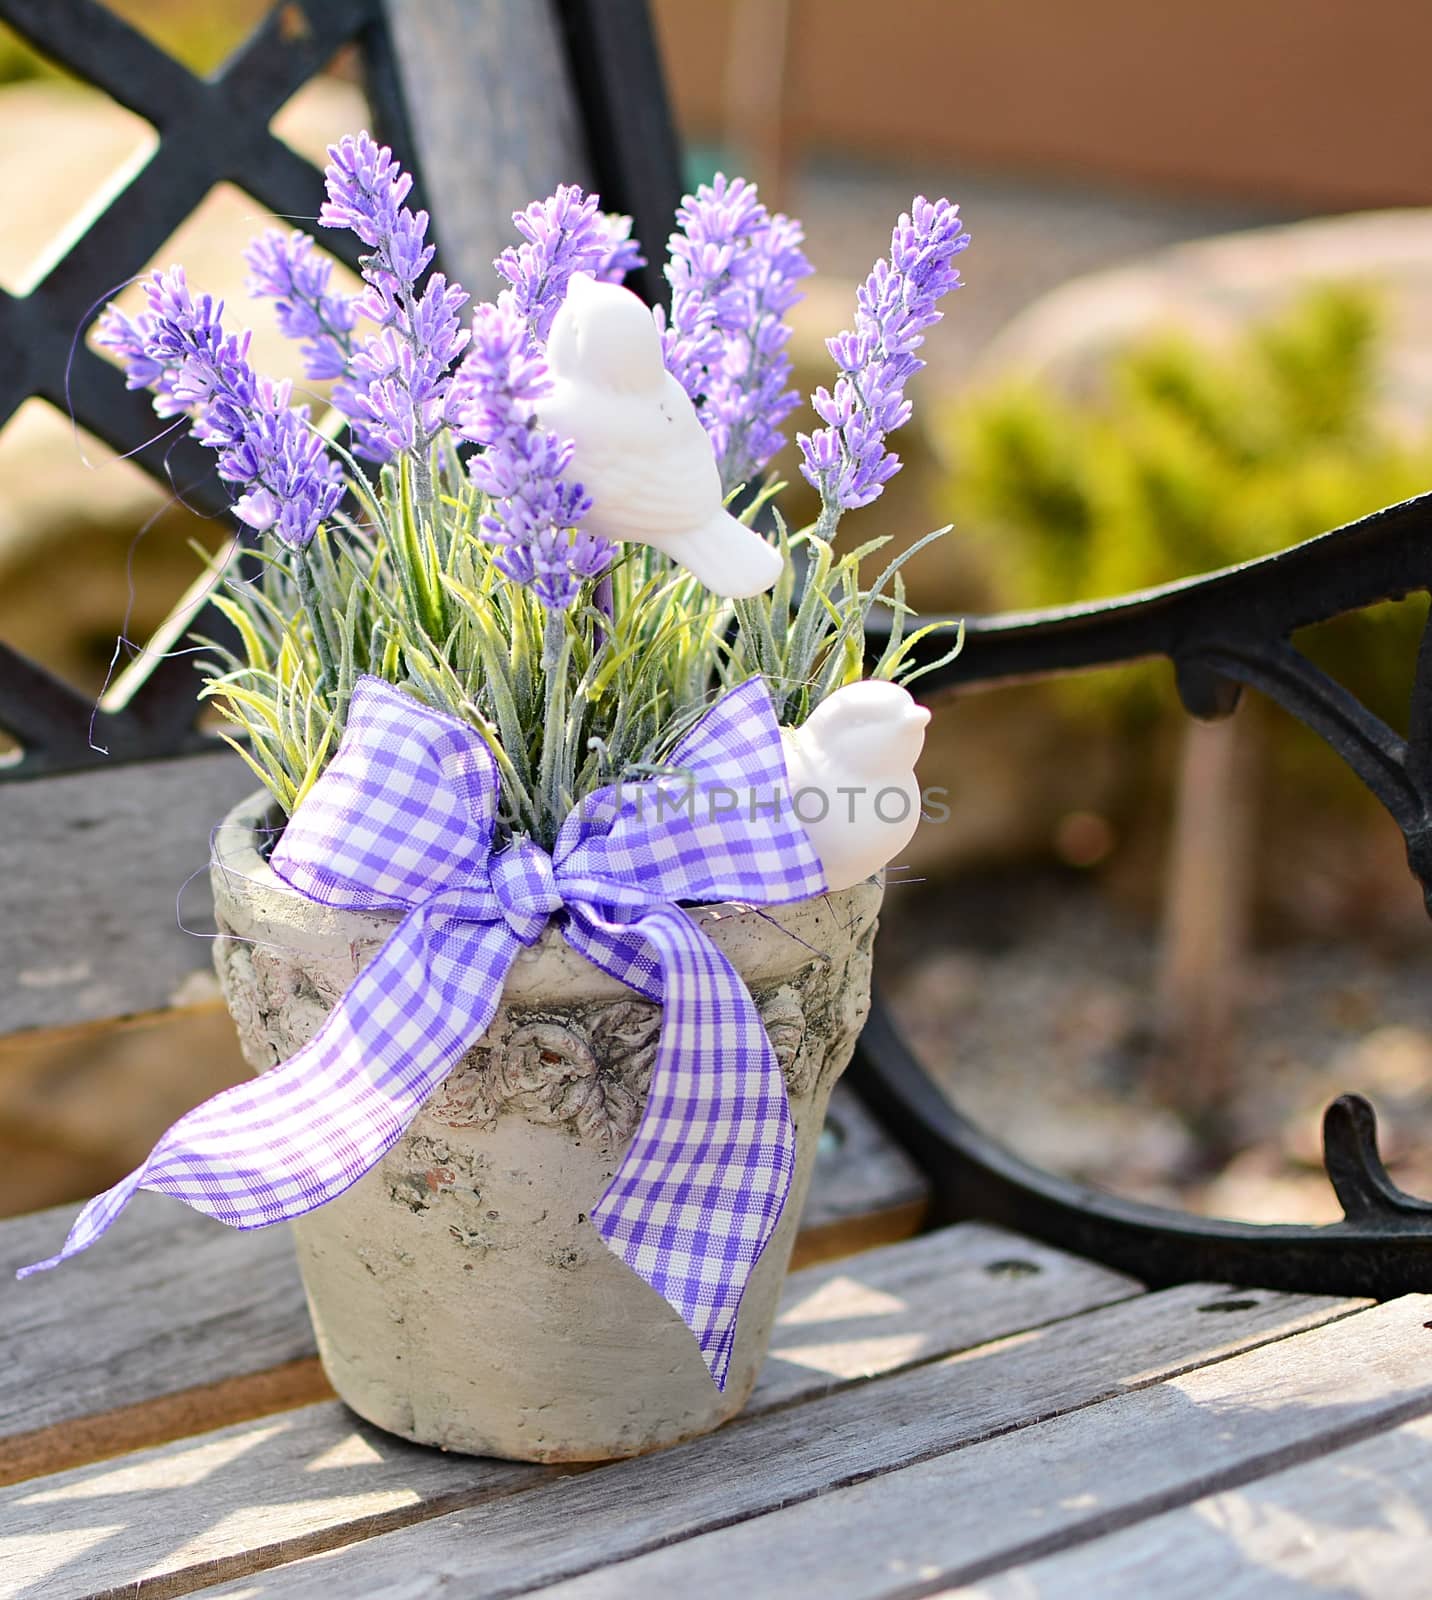 Lavender in the old pot on the bench. Home decoration.